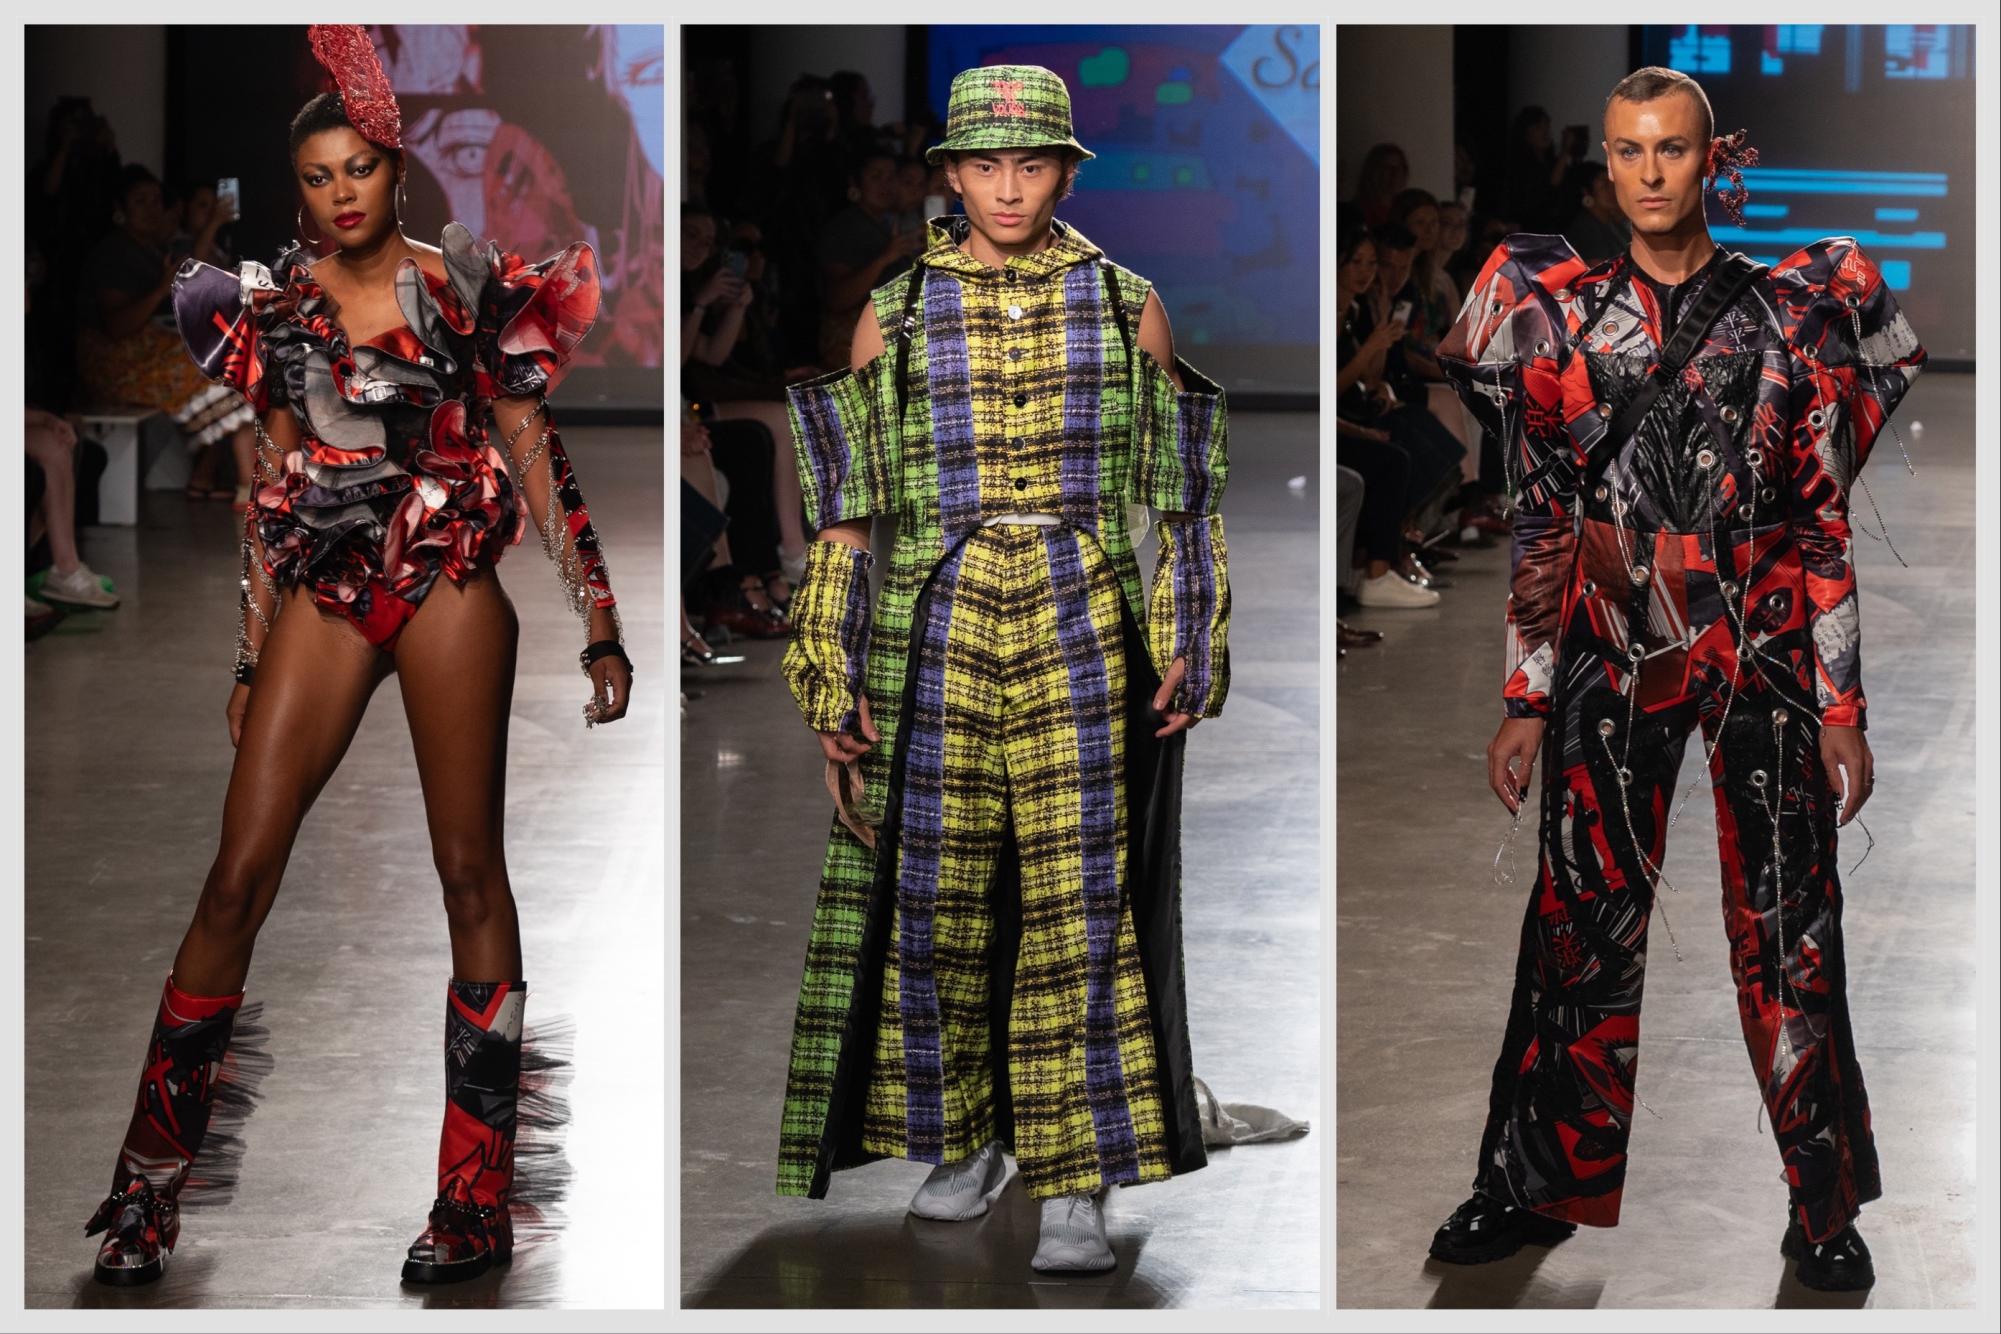 A collage of three images from left to right: a model wearing a red-and-black ruffled bodysuit; a model wearing plaid bottomed-up top and trousers; a model wearing red-and-black suit.